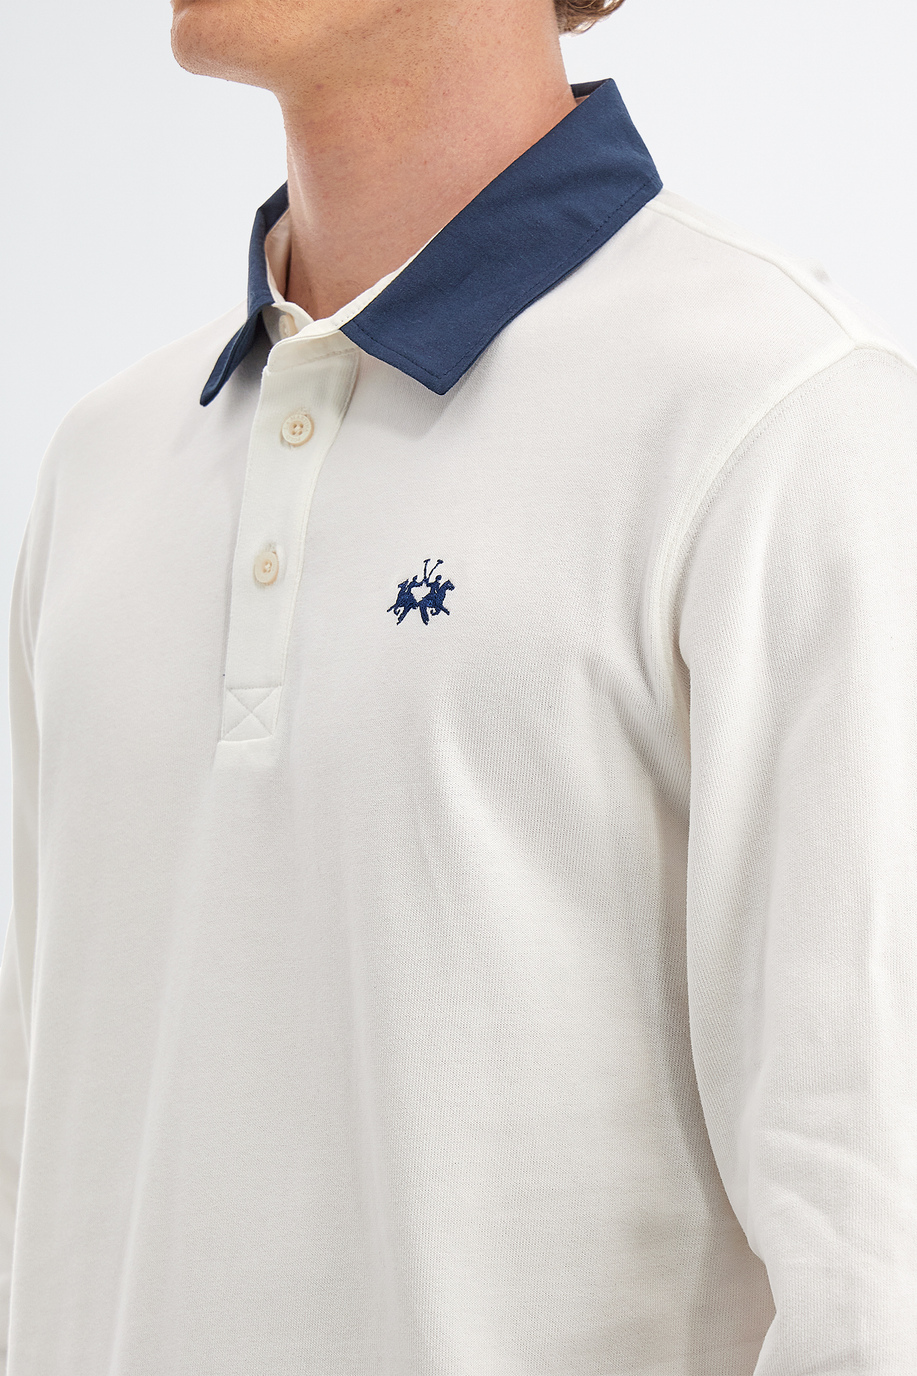 Men’s polo shirt with long sleeves in regular fit jersey cotton - Regular fit | La Martina - Official Online Shop